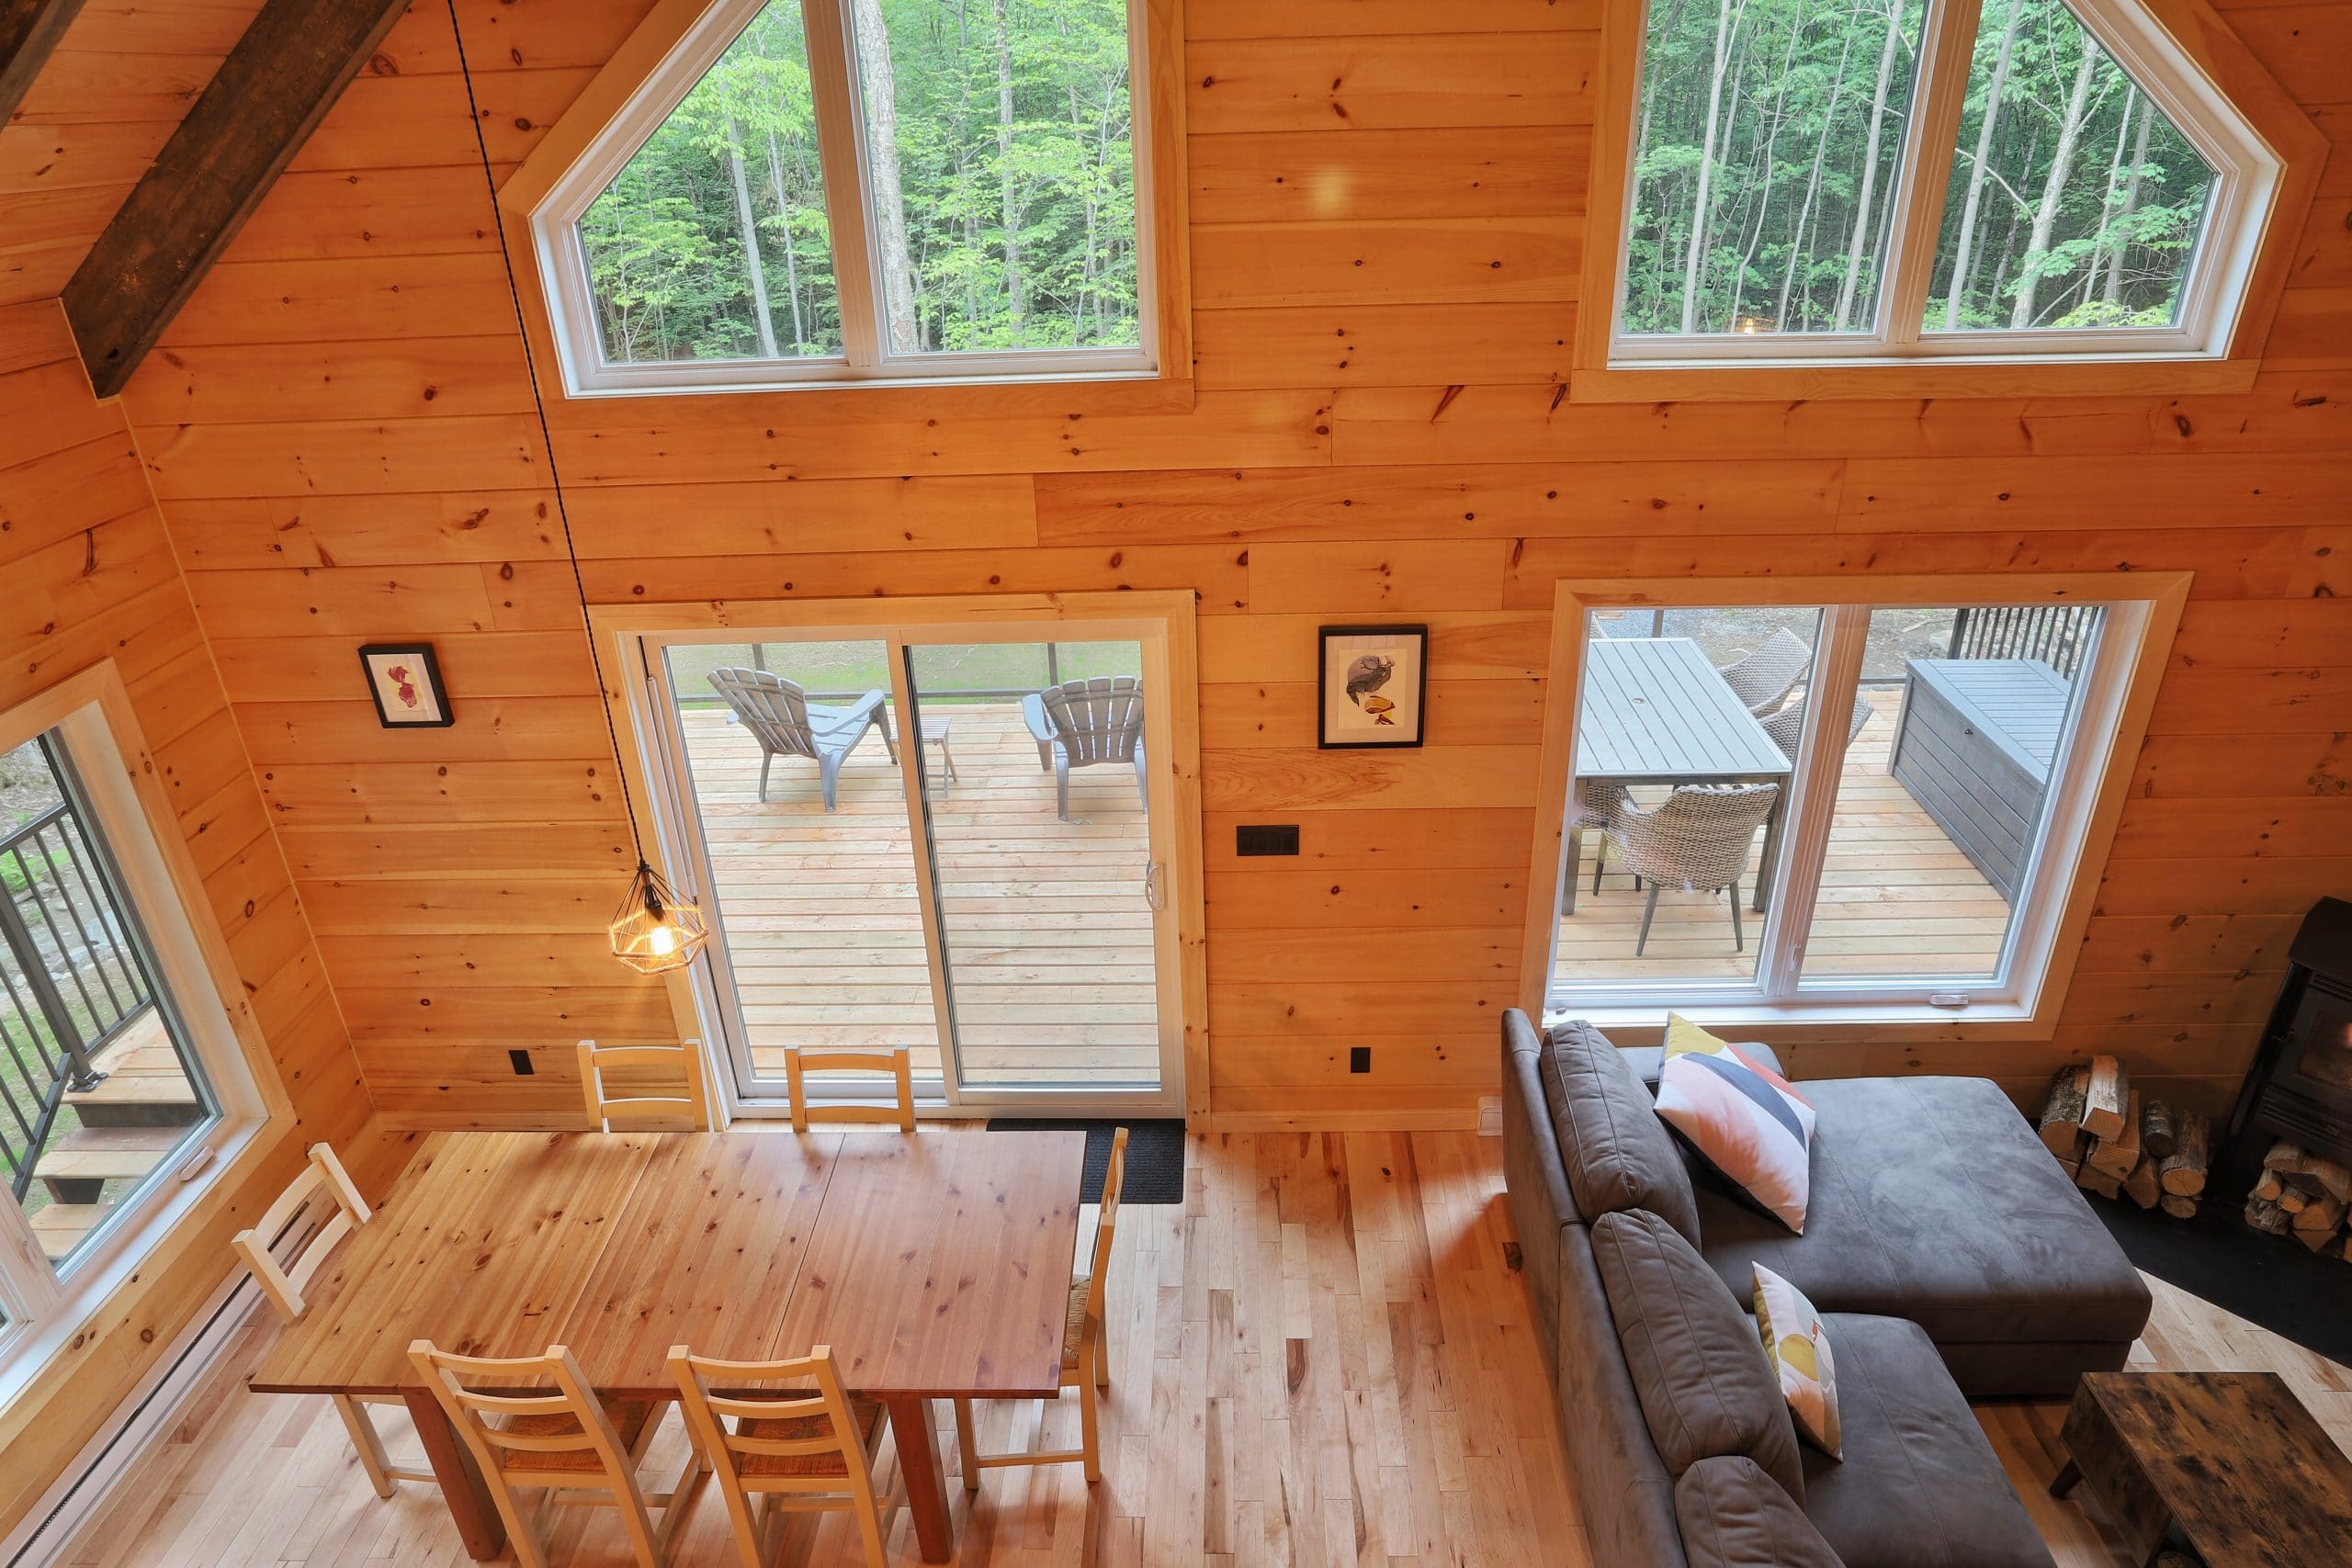 Photos of the chalet, number 6